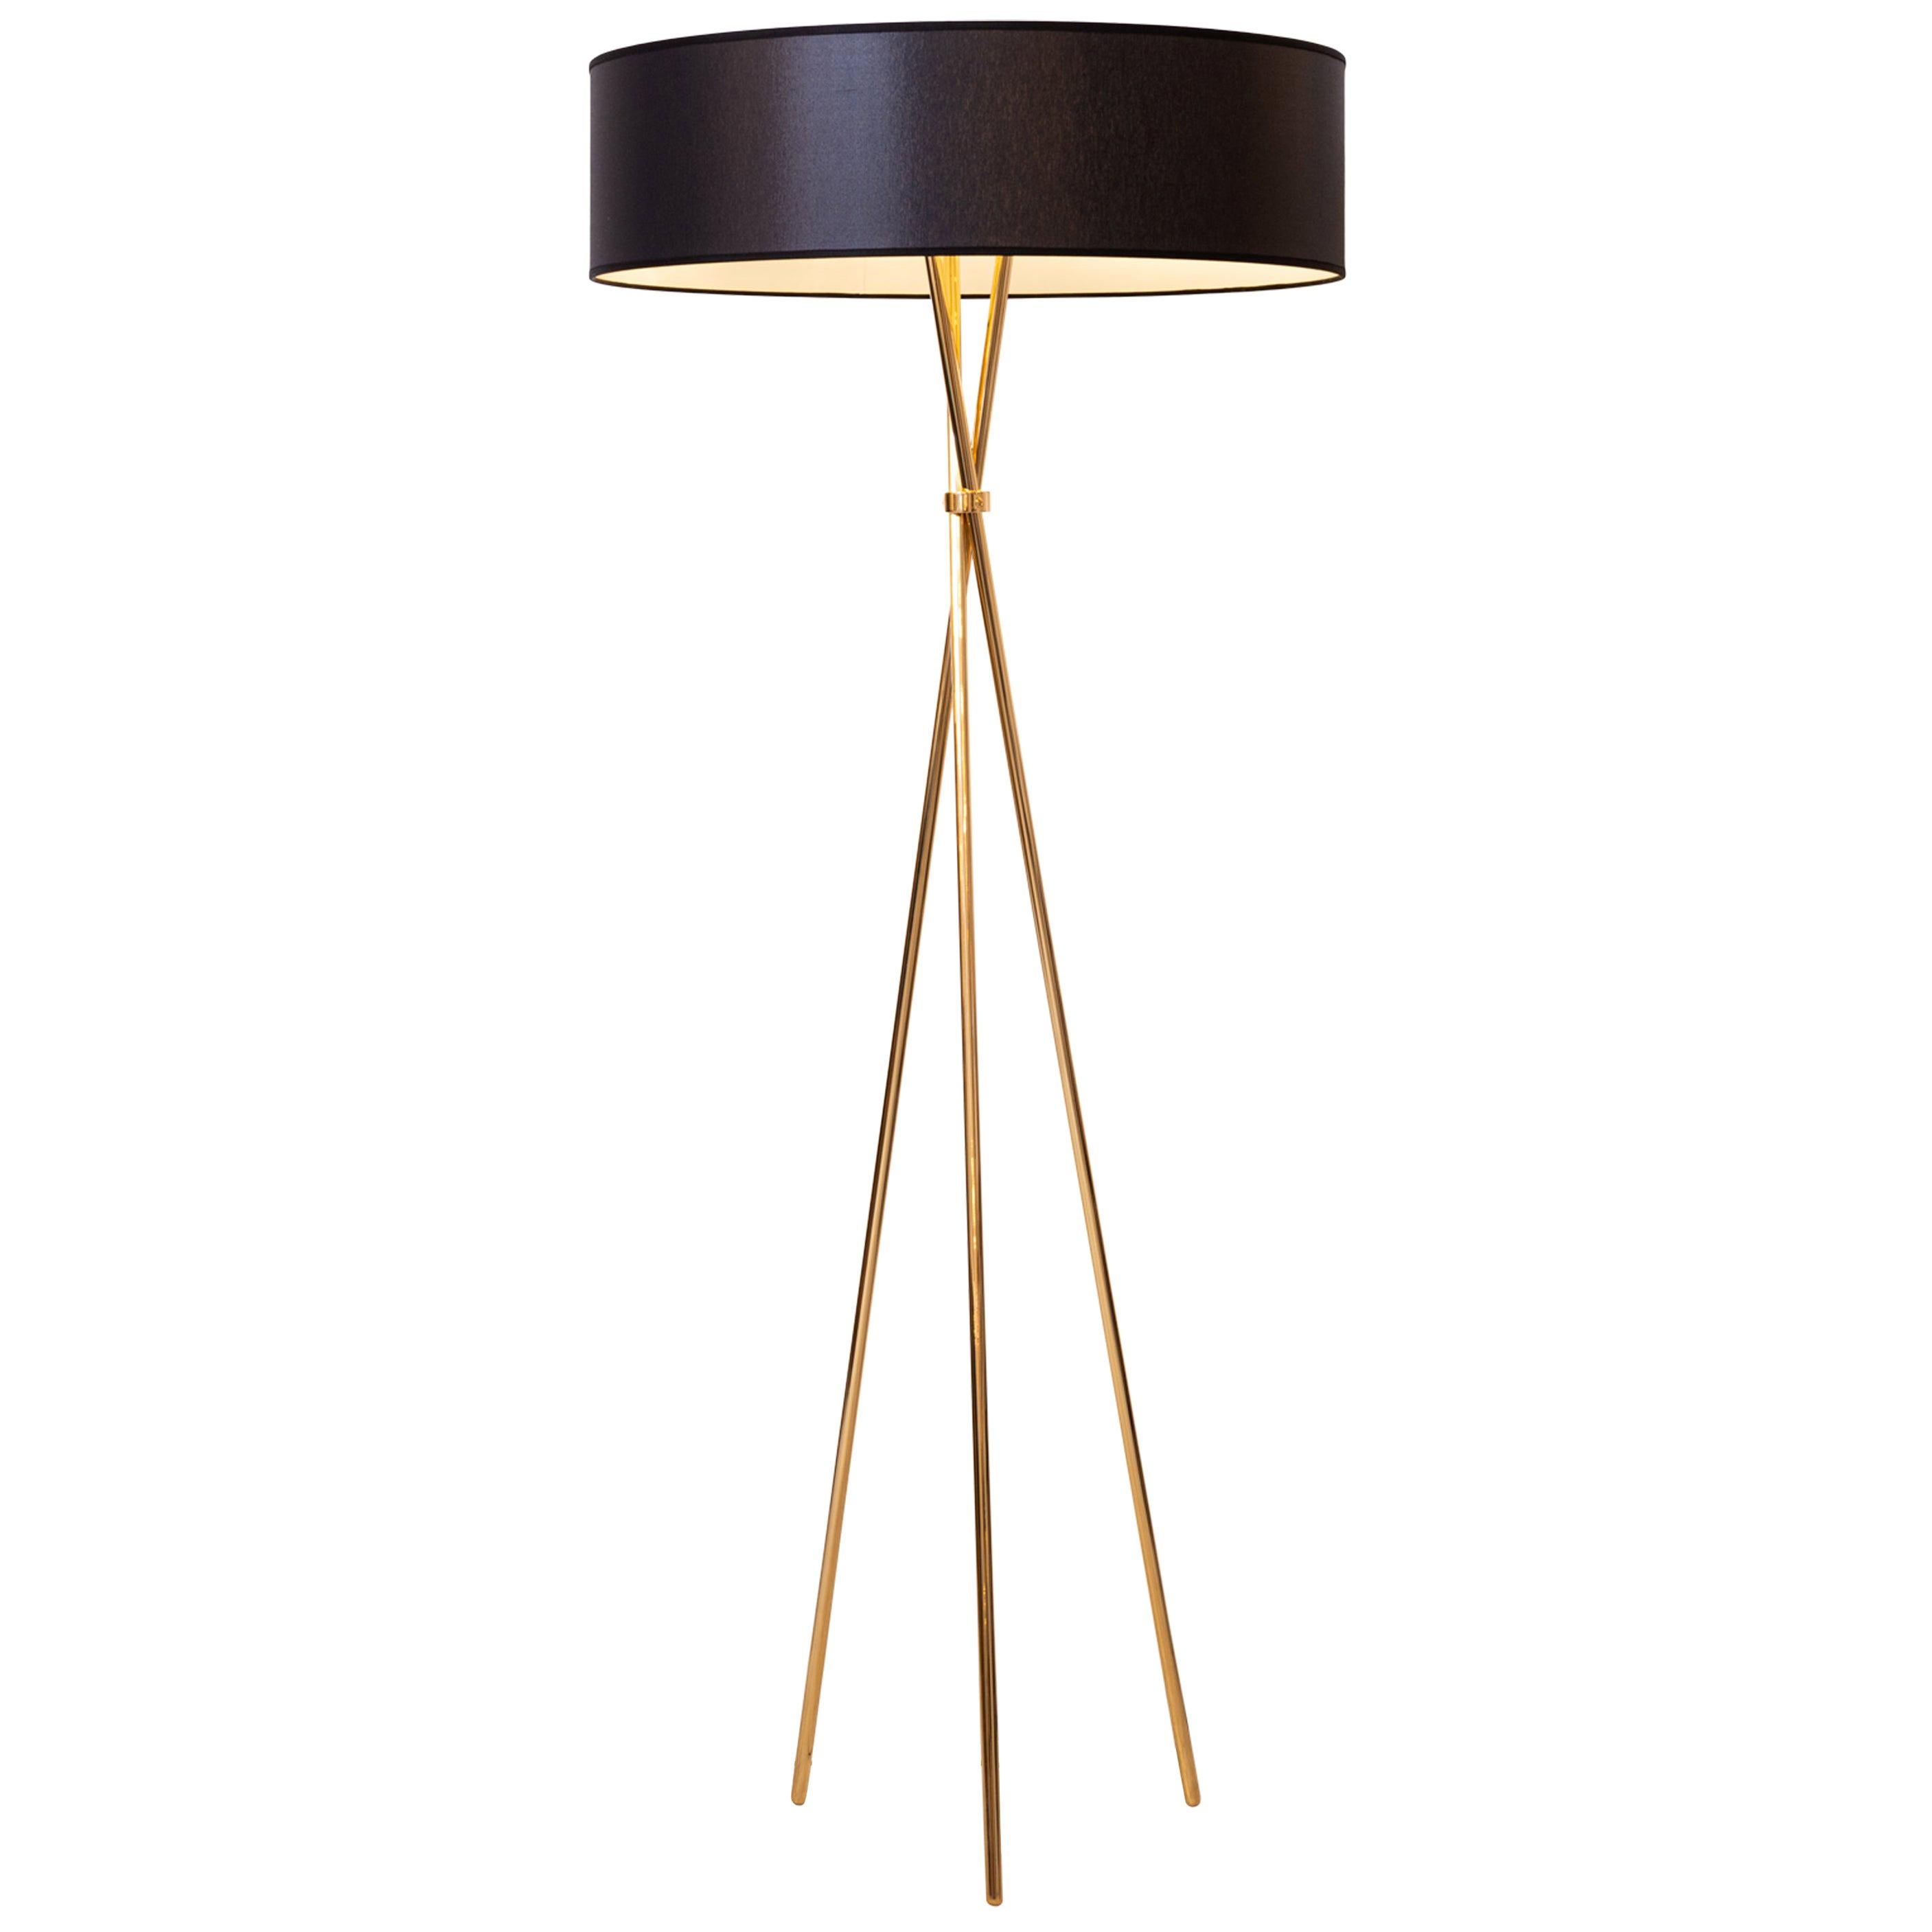 Modern brass Floor-Lamp with a Big Carton-Shade, "Quo Vadis" For Sale